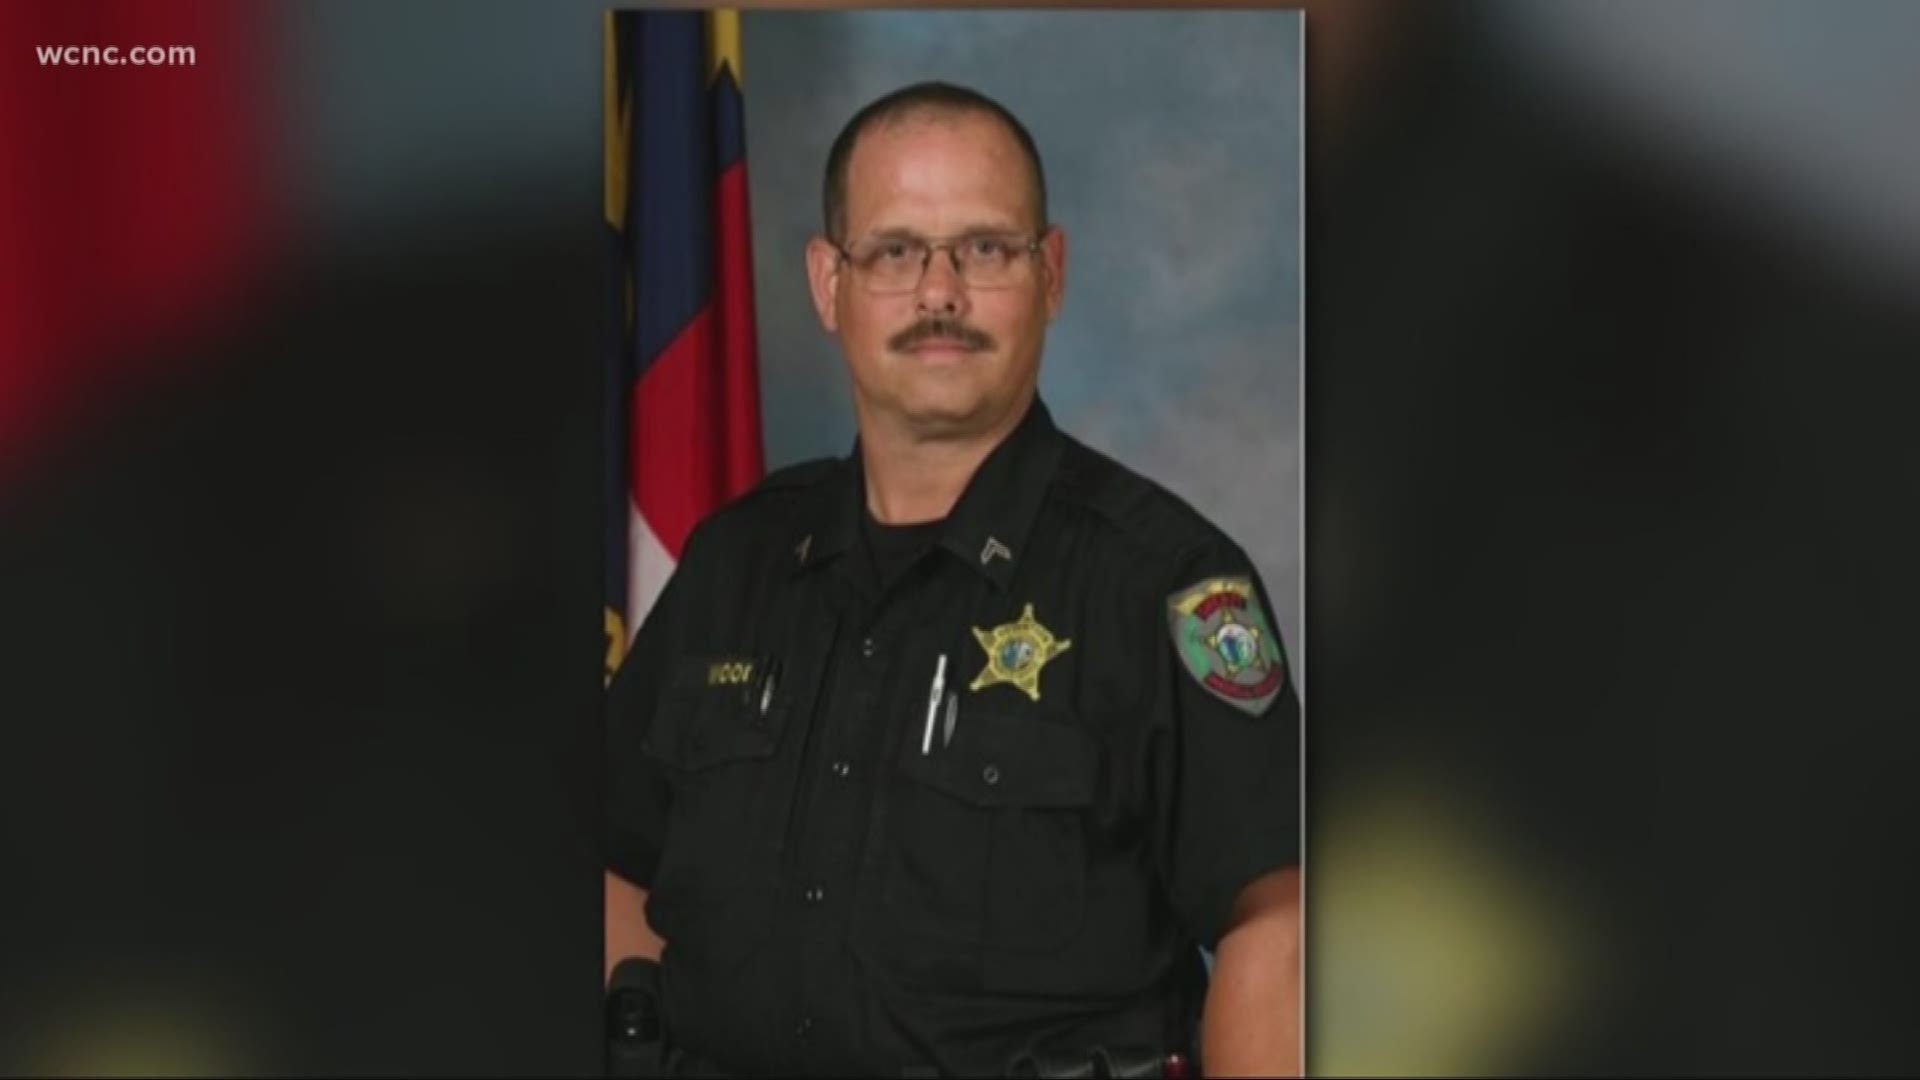 Hundreds of first responders and motorcyclists gathered Tuesday in Iredell County for the funeral of an off-deputy killed after colliding with the SUV of an on-duty deputy.